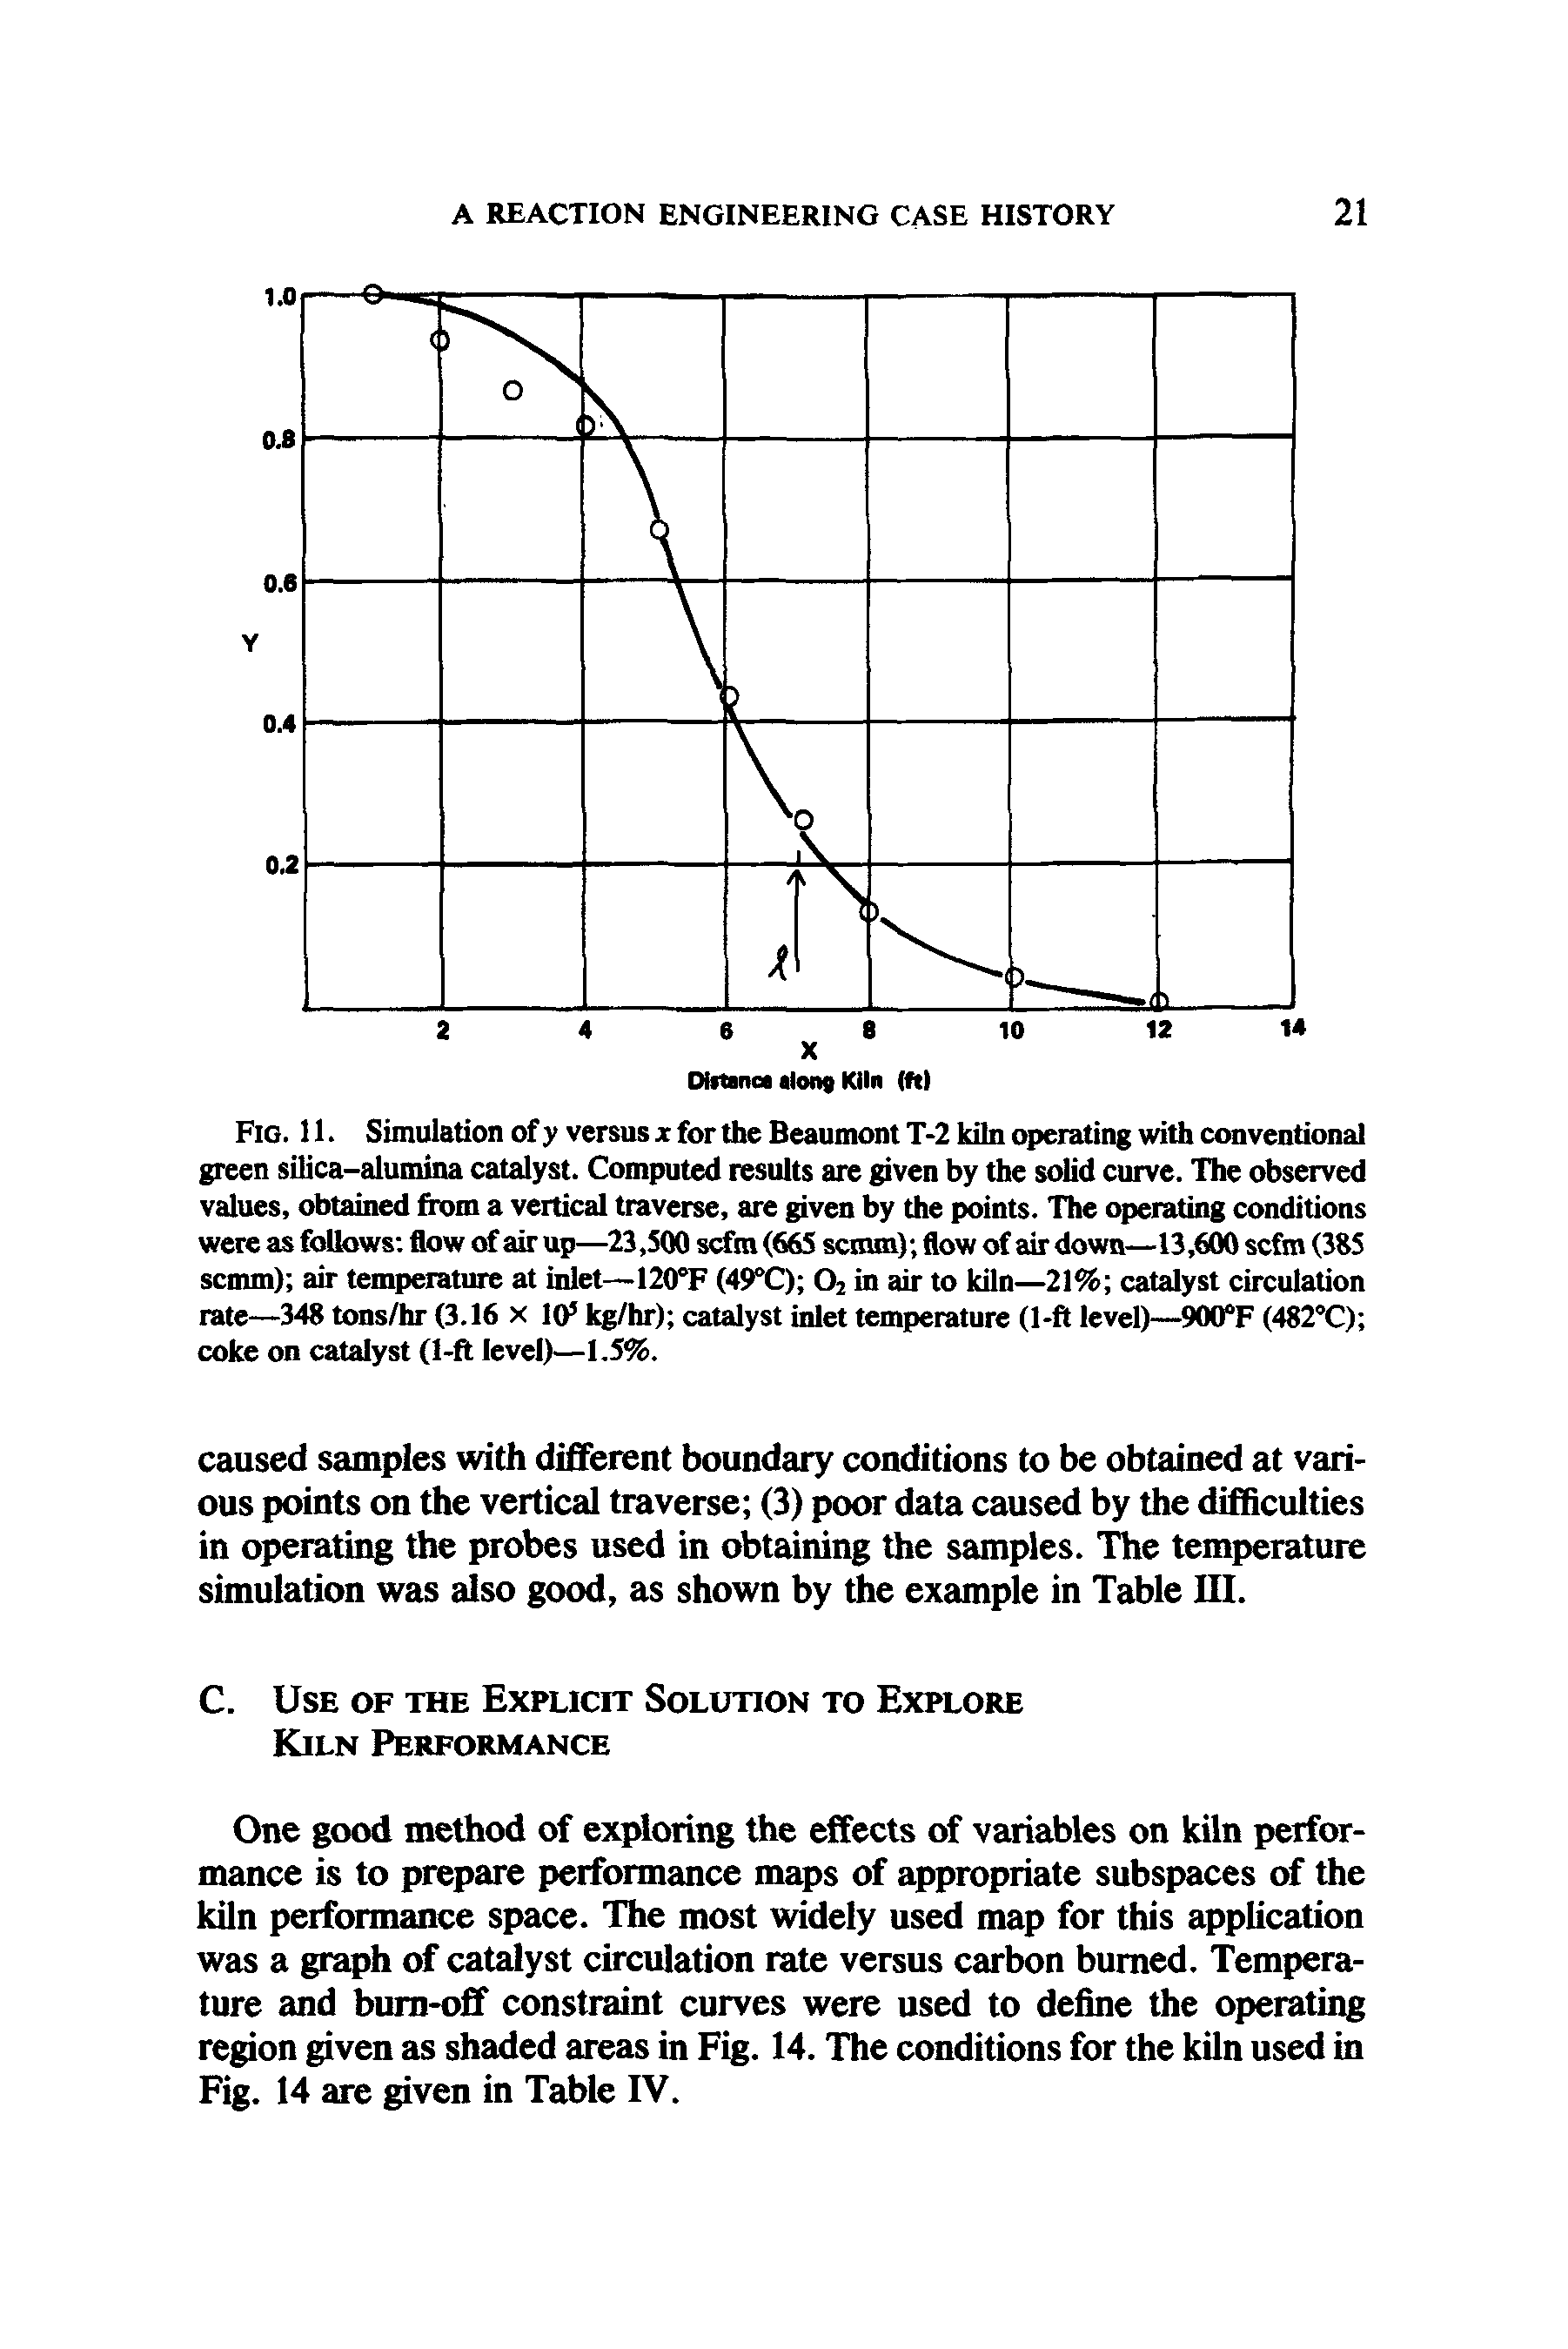 Fig. 11. Simulation of y versus x for the Beaumont T-2 kiln operating with conventional green silica-alumina catalyst. Computed results are given by the solid curve. The observed values, obtained fix>m a vertical traverse, are given by the points. The operating conditions were as follows flow of air up—23,500 scfm (665 semm) flow of air down—13,600 scfm (385 semm) air temperature at inlet—120°F (4 >°C) O2 in air to kiln—21% catalyst circulation rate—348 tons/hr (3.16 x KF kg/hr) catalyst inlet temperature (1-ft level)—900°F (482°C) coke on catalyst (1-ft level)—1.5%.